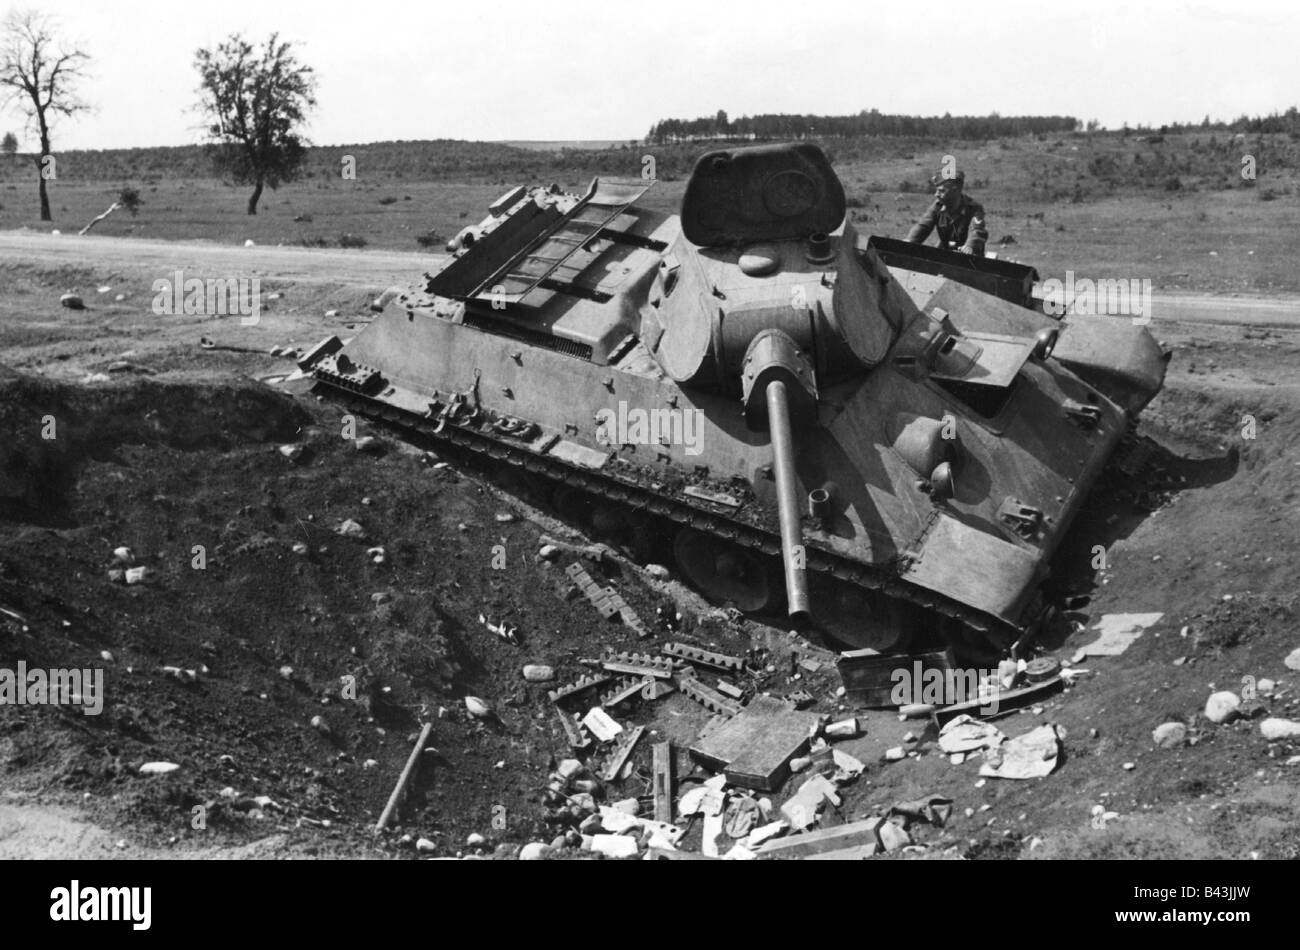 events, Second World War / WWII, Russia 1941, German advance, knocked out Soviet tank T-34/76, German Luftwaffe soldier inspecting it, July 1941, Stock Photo